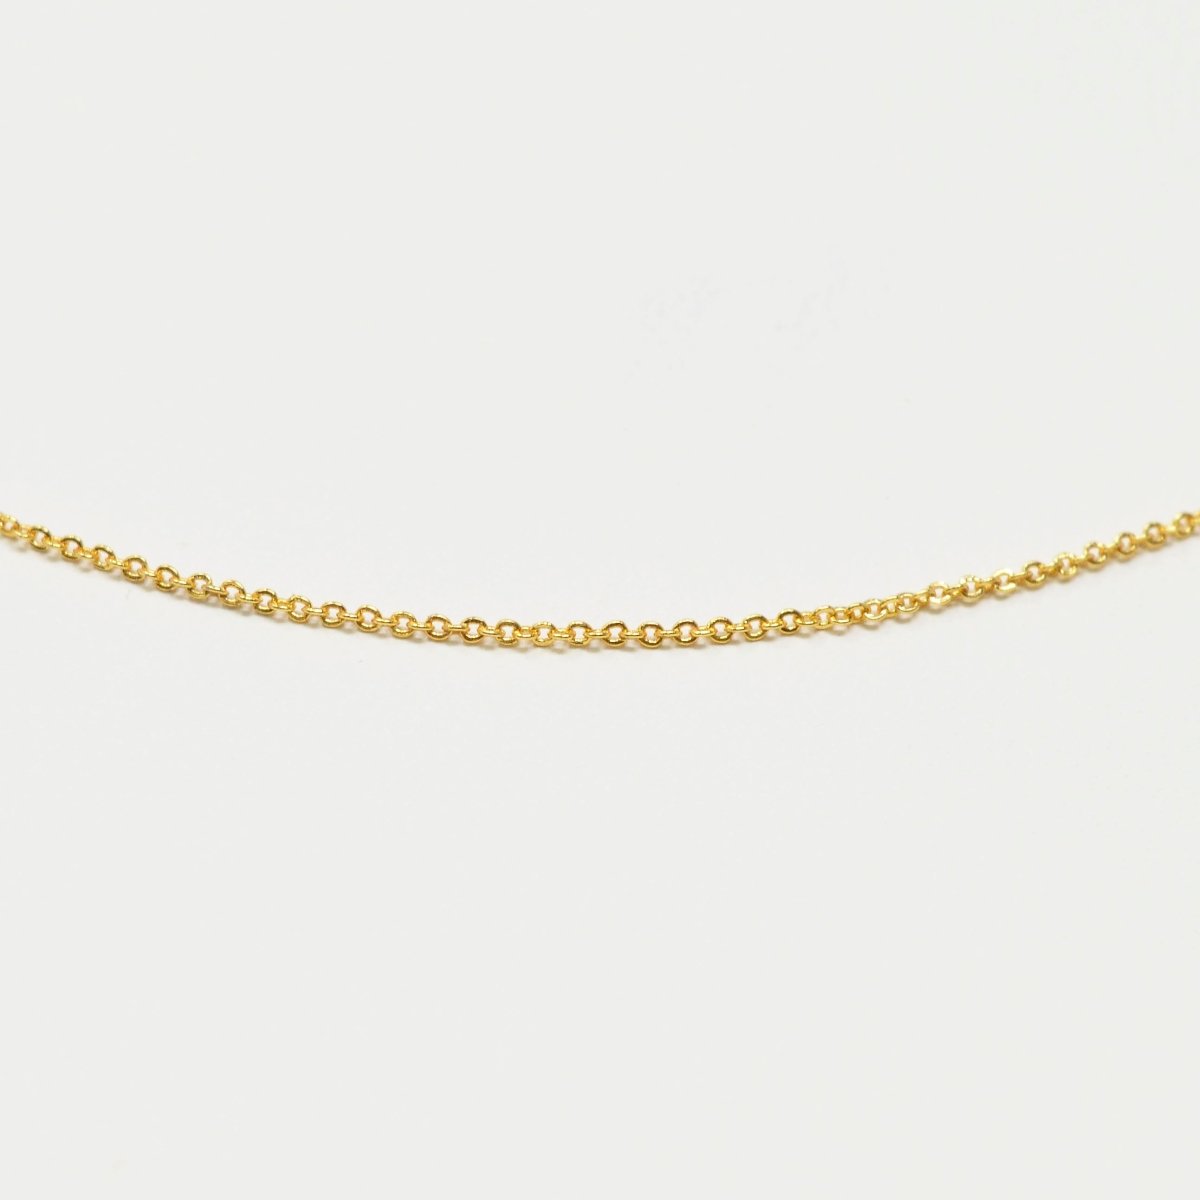 Dainty 24K Gold Filled 1mm Rolo Cable 18 Inch Chain Necklace w/ Spring Ring | CN-989 - DLUXCA